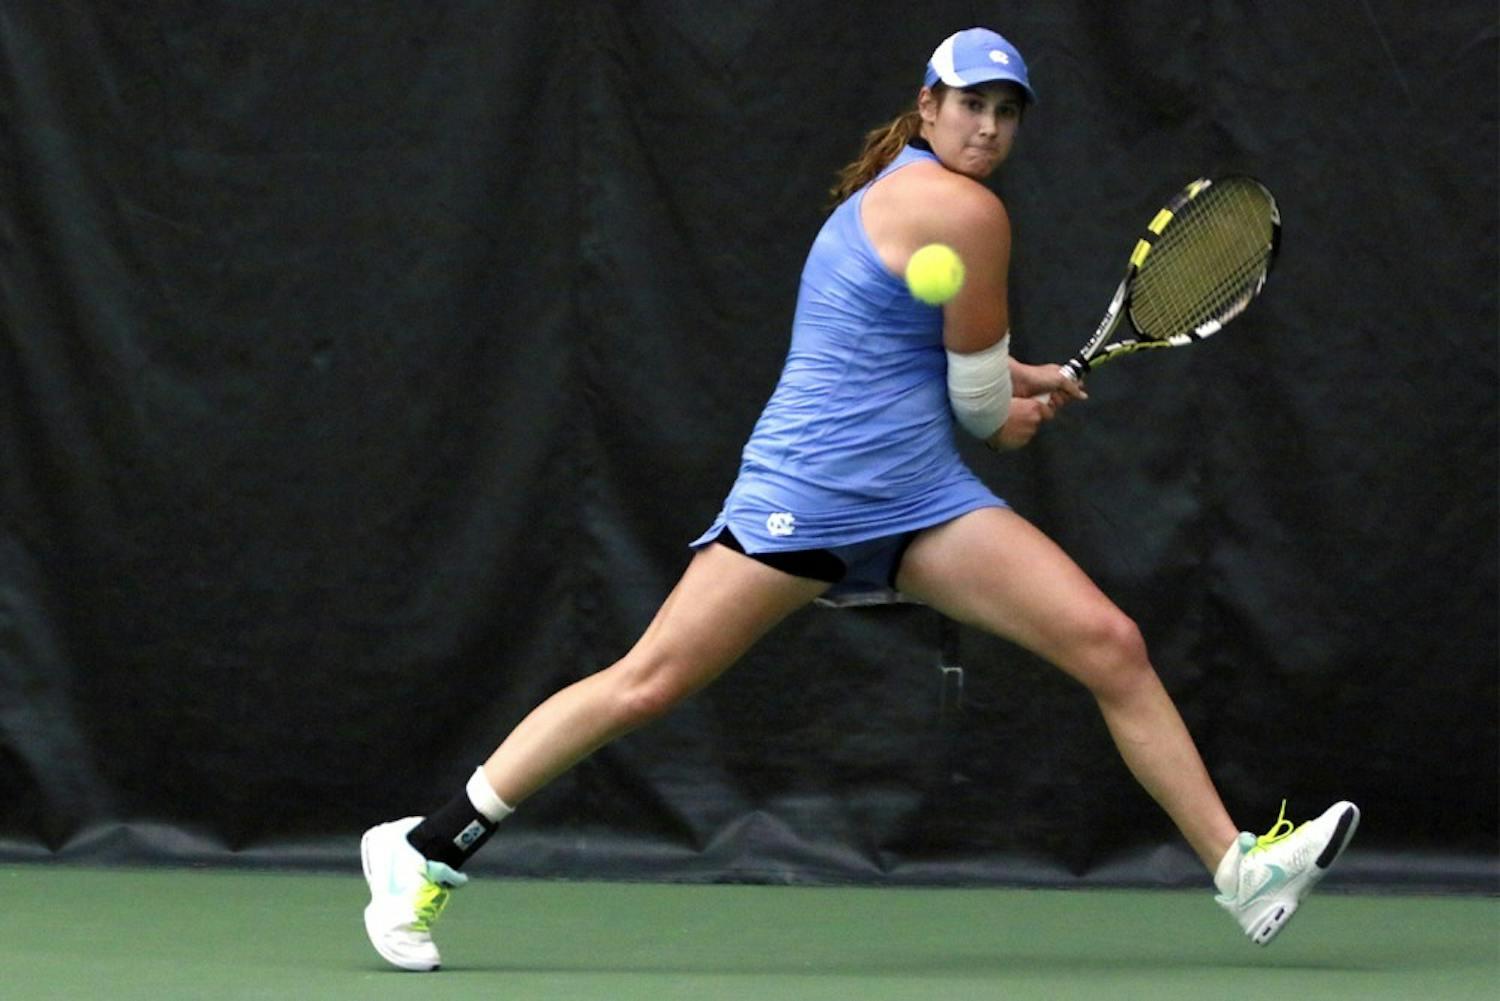 Sophomore Hayley Carter is second on the North Carolina women’s tennis team in singles wins.